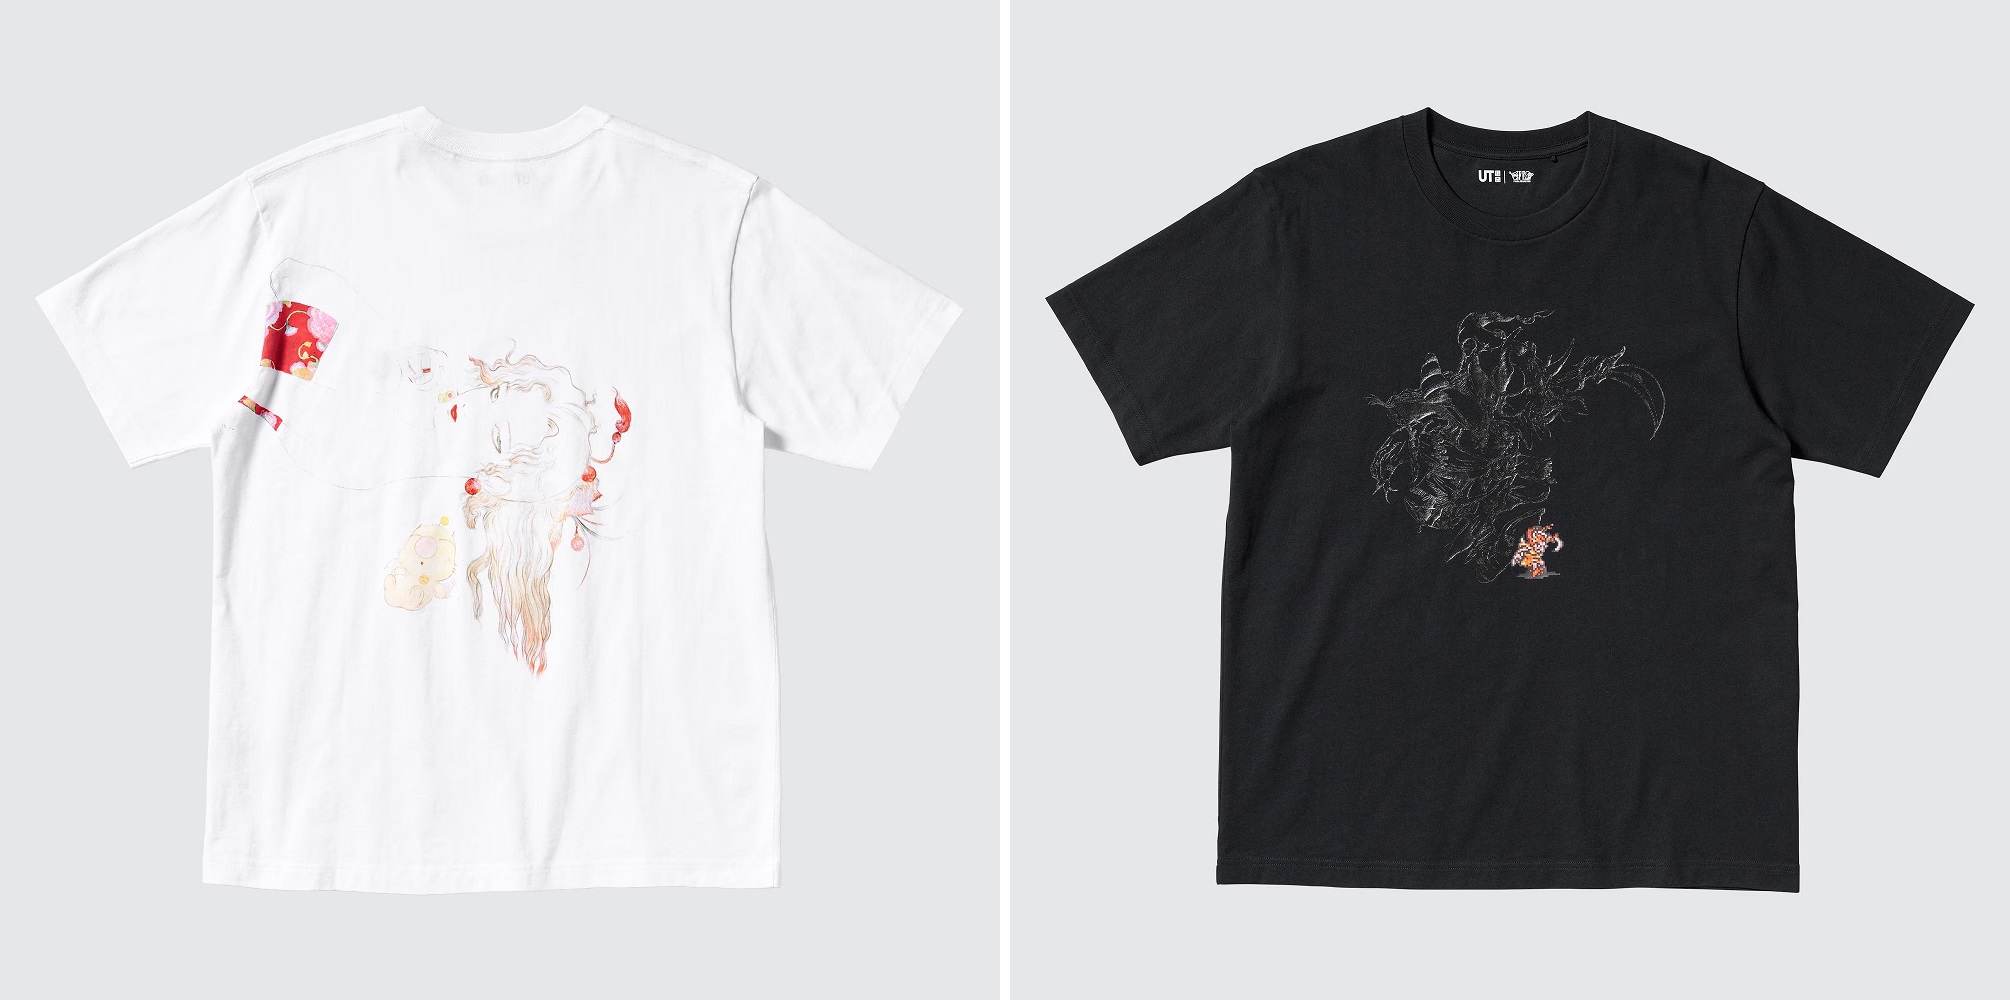 Beautiful new Final Fantasy T-shirt collection on the way from Uniqlo ...